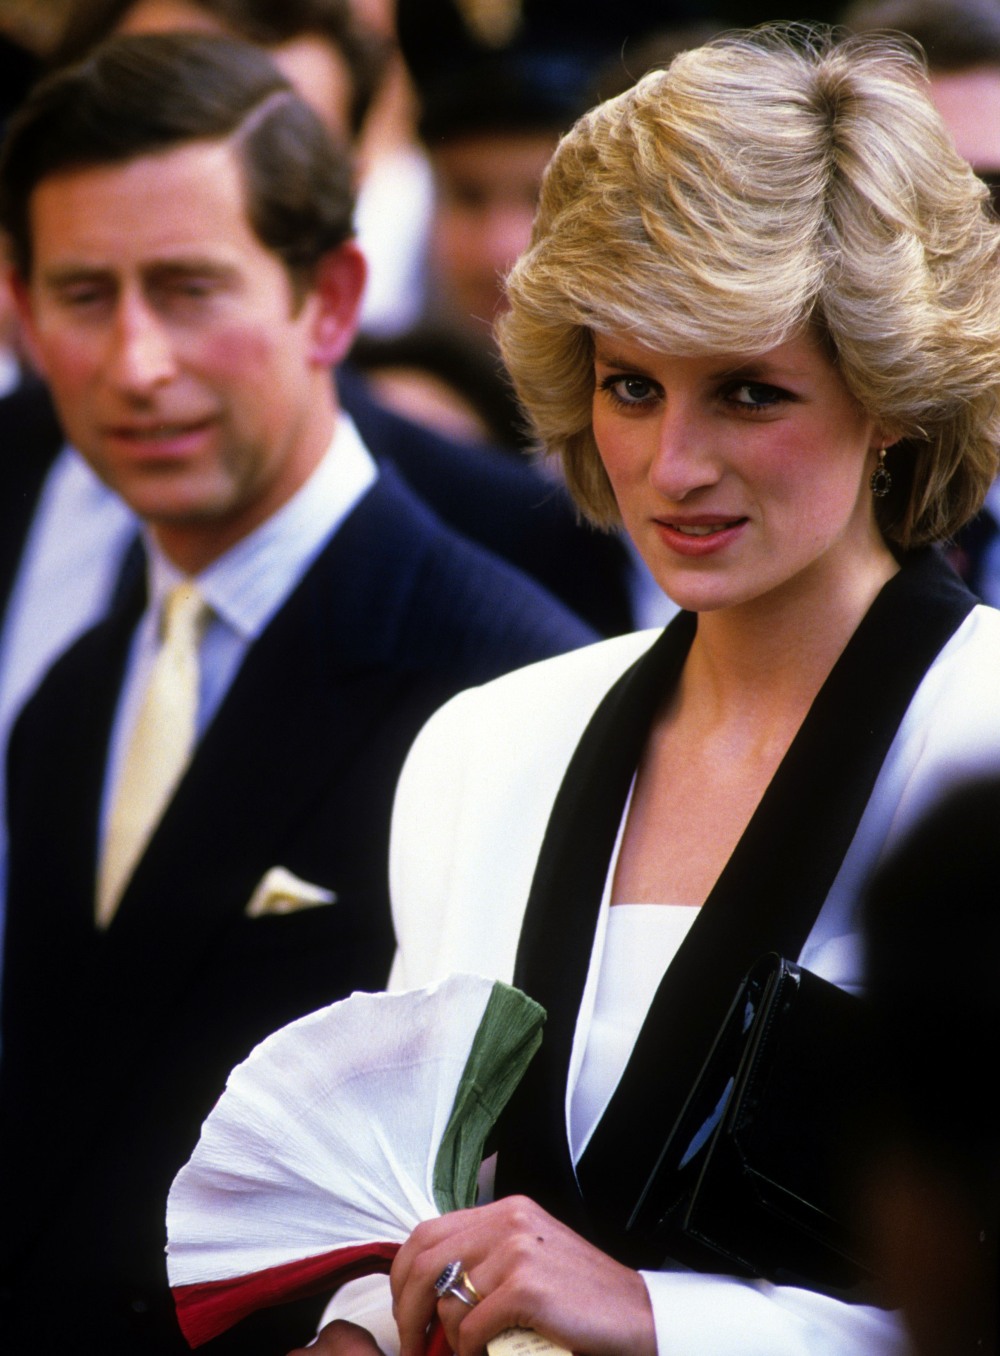 Charles and Diana in Italy